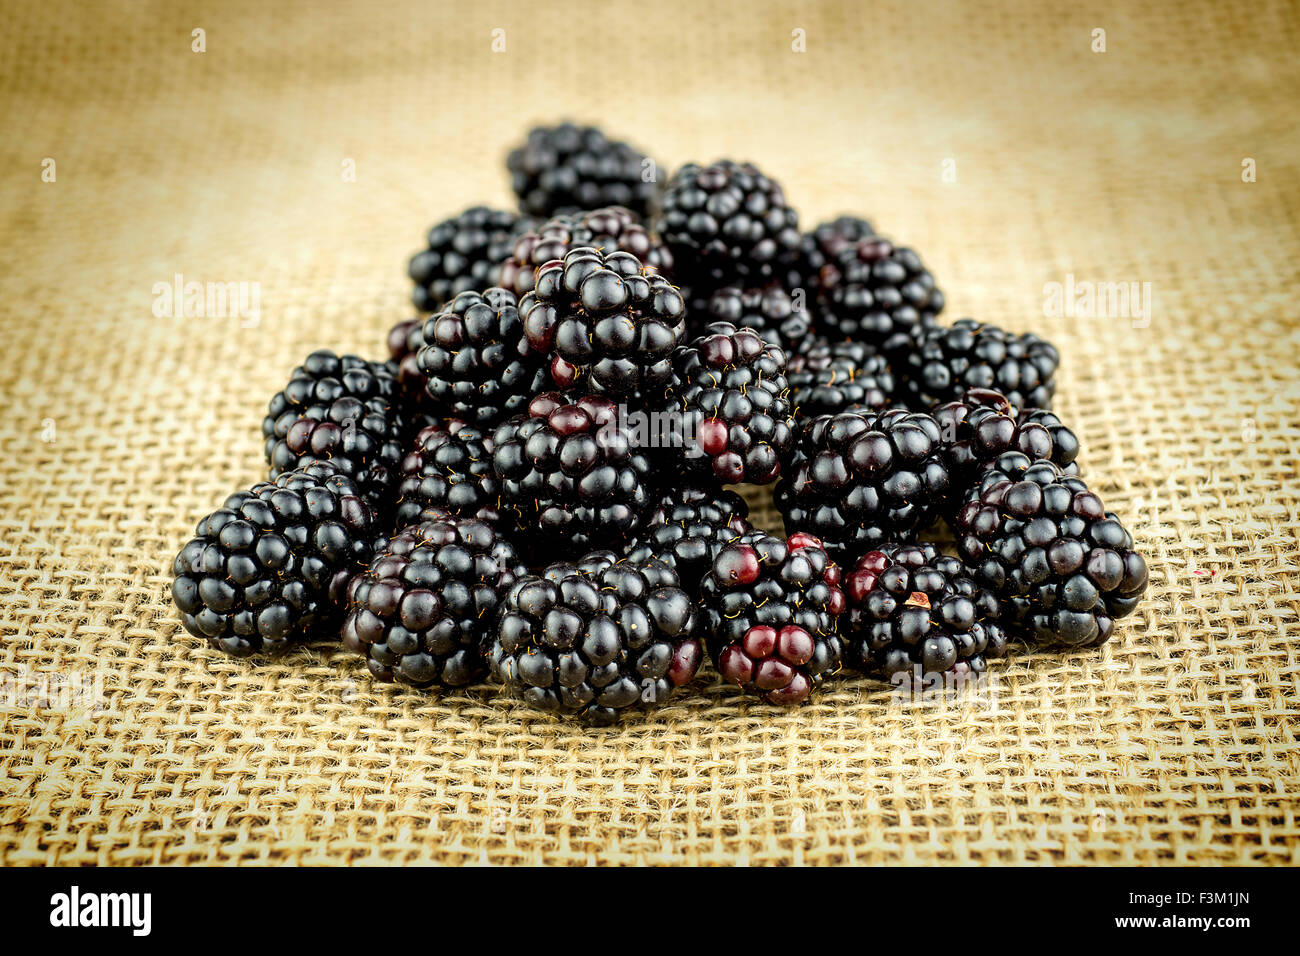 Closeup of pile of blackberries with shallow depth of field Stock Photo